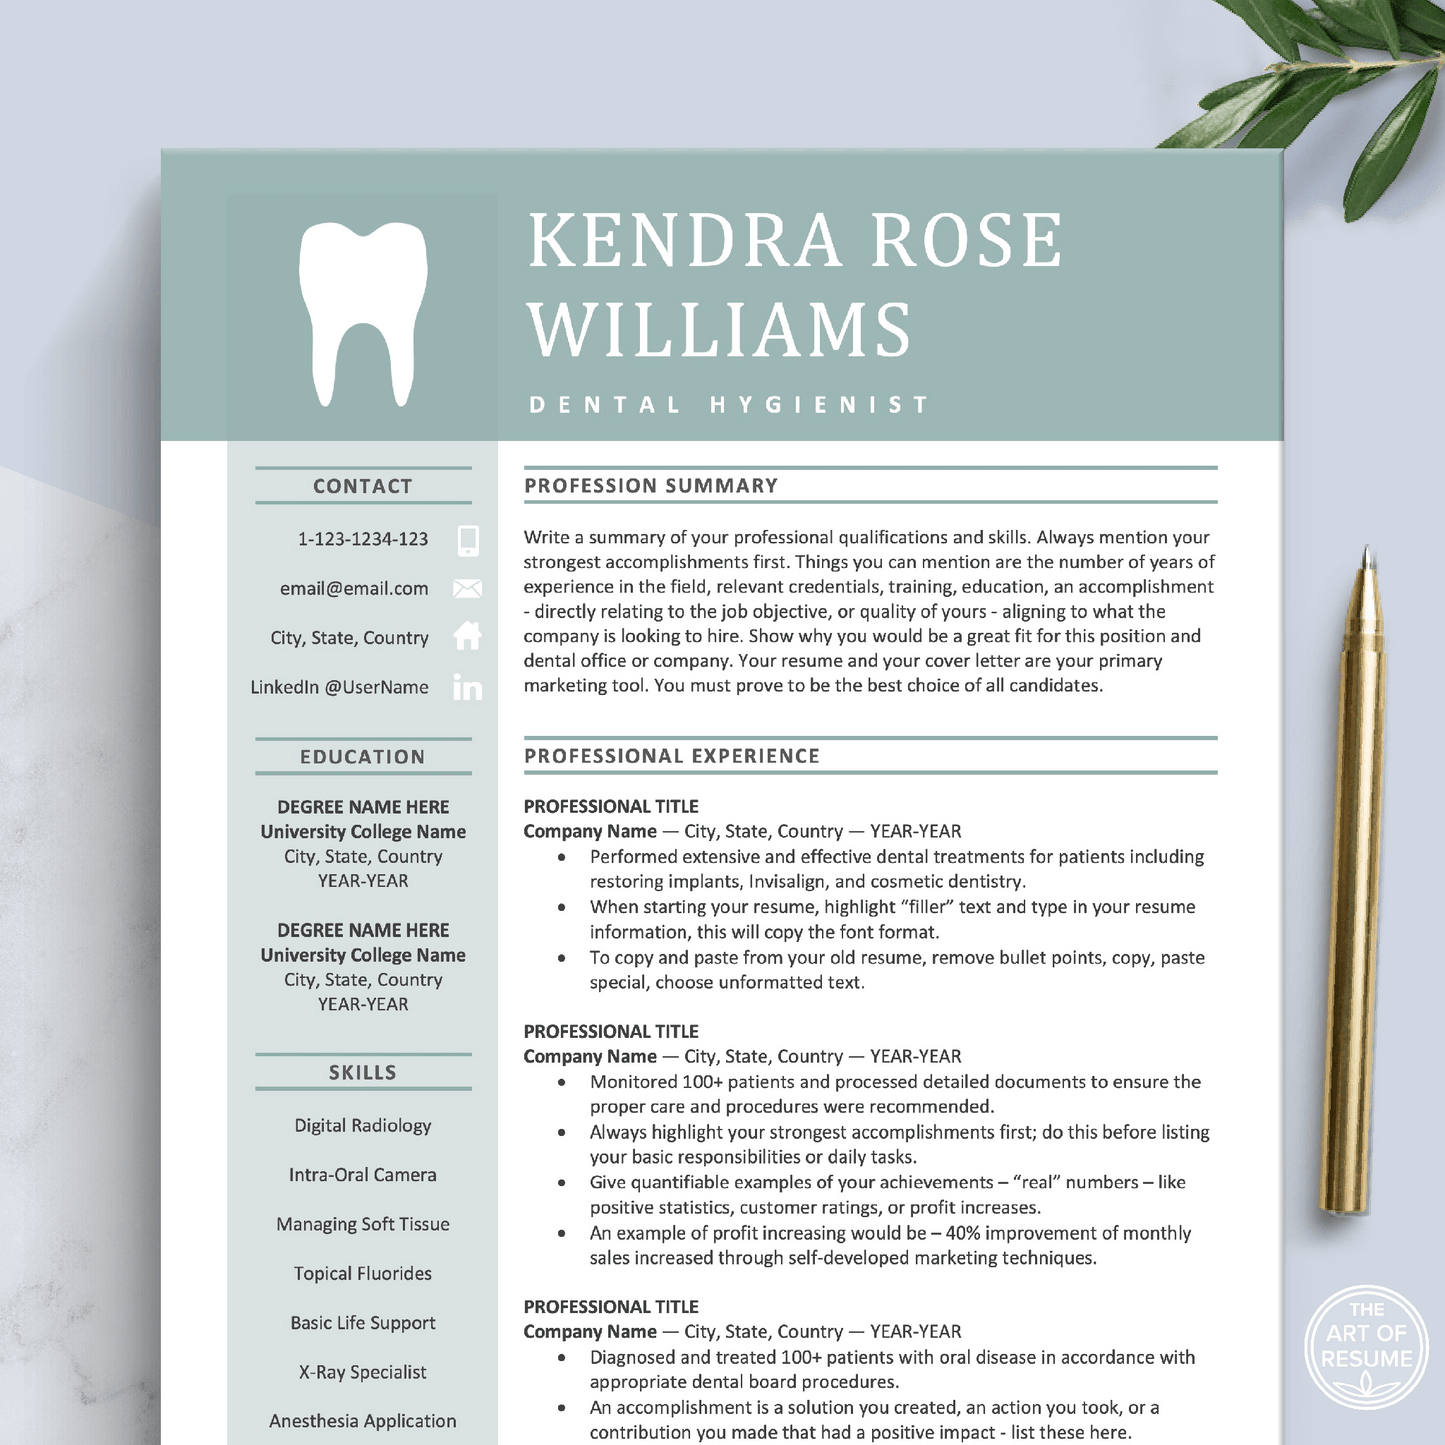 The Art of Resume Templates | Dentist, Hygienist, Dental Student, Assistant Resume CV Design Template Maker, Download for Apple Pages and Microsoft Word, Mac and PC Resume CV Template | Curriculum Vitae for Apple Pages, Microsoft Word, Mac, PC